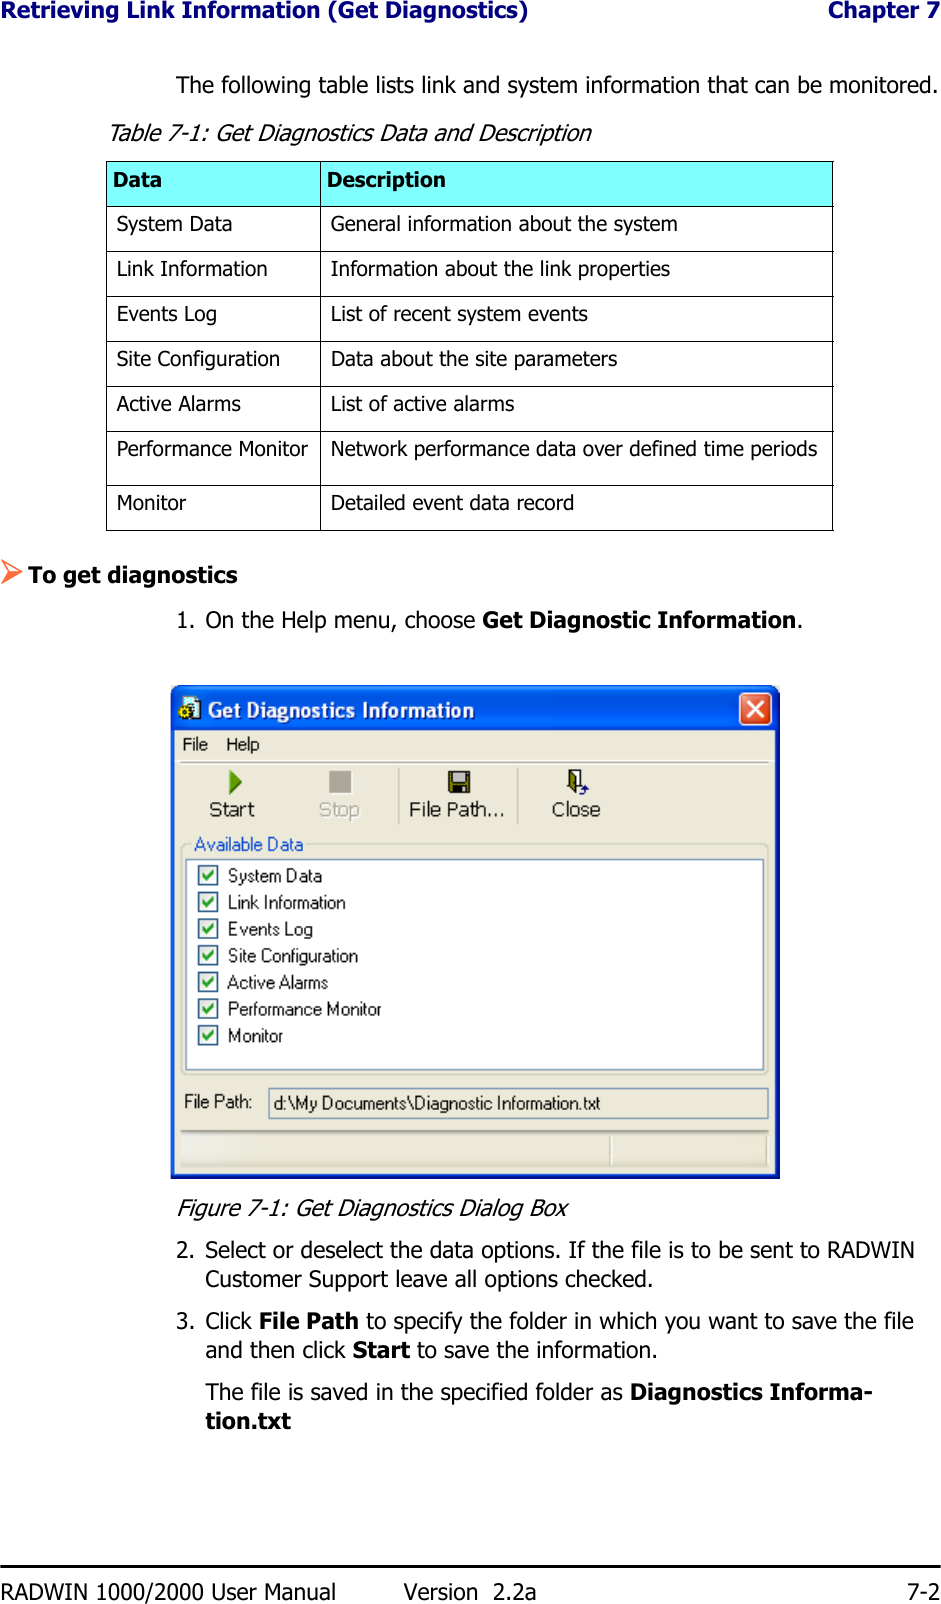 Retrieving Link Information (Get Diagnostics)  Chapter 7RADWIN 1000/2000 User Manual Version  2.2a 7-2The following table lists link and system information that can be monitored.¾To get diagnostics1. On the Help menu, choose Get Diagnostic Information.Figure 7-1: Get Diagnostics Dialog Box2. Select or deselect the data options. If the file is to be sent to RADWIN Customer Support leave all options checked.3. Click File Path to specify the folder in which you want to save the file and then click Start to save the information.The file is saved in the specified folder as Diagnostics Informa-tion.txtTable 7-1: Get Diagnostics Data and DescriptionData DescriptionSystem Data General information about the systemLink Information Information about the link propertiesEvents Log List of recent system eventsSite Configuration Data about the site parametersActive Alarms List of active alarmsPerformance Monitor Network performance data over defined time periodsMonitor Detailed event data record